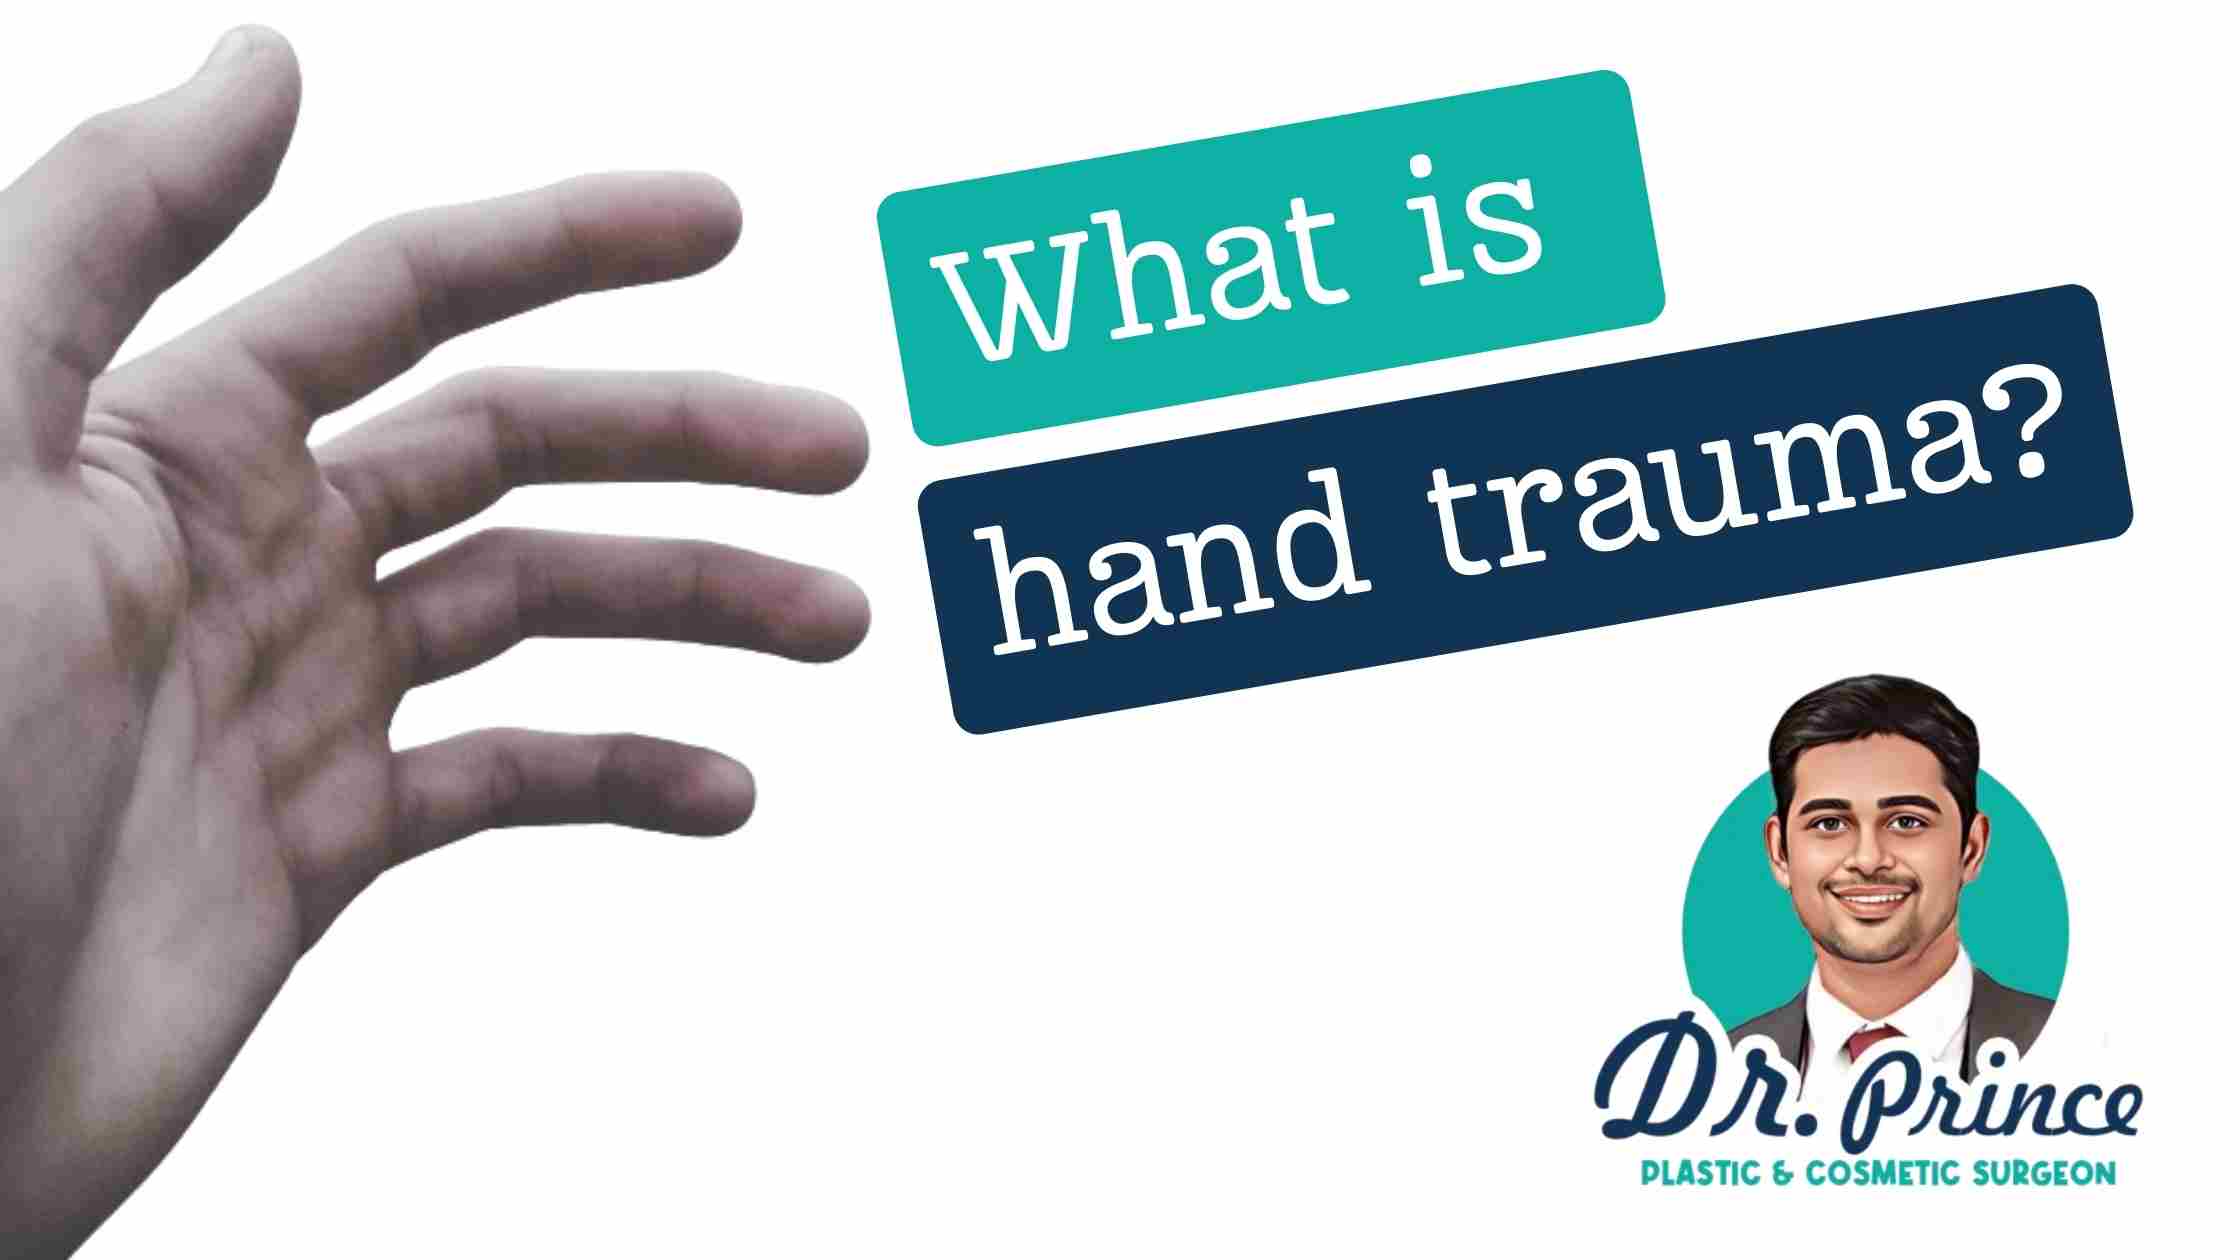 Illustration depicting the concept of hand trauma